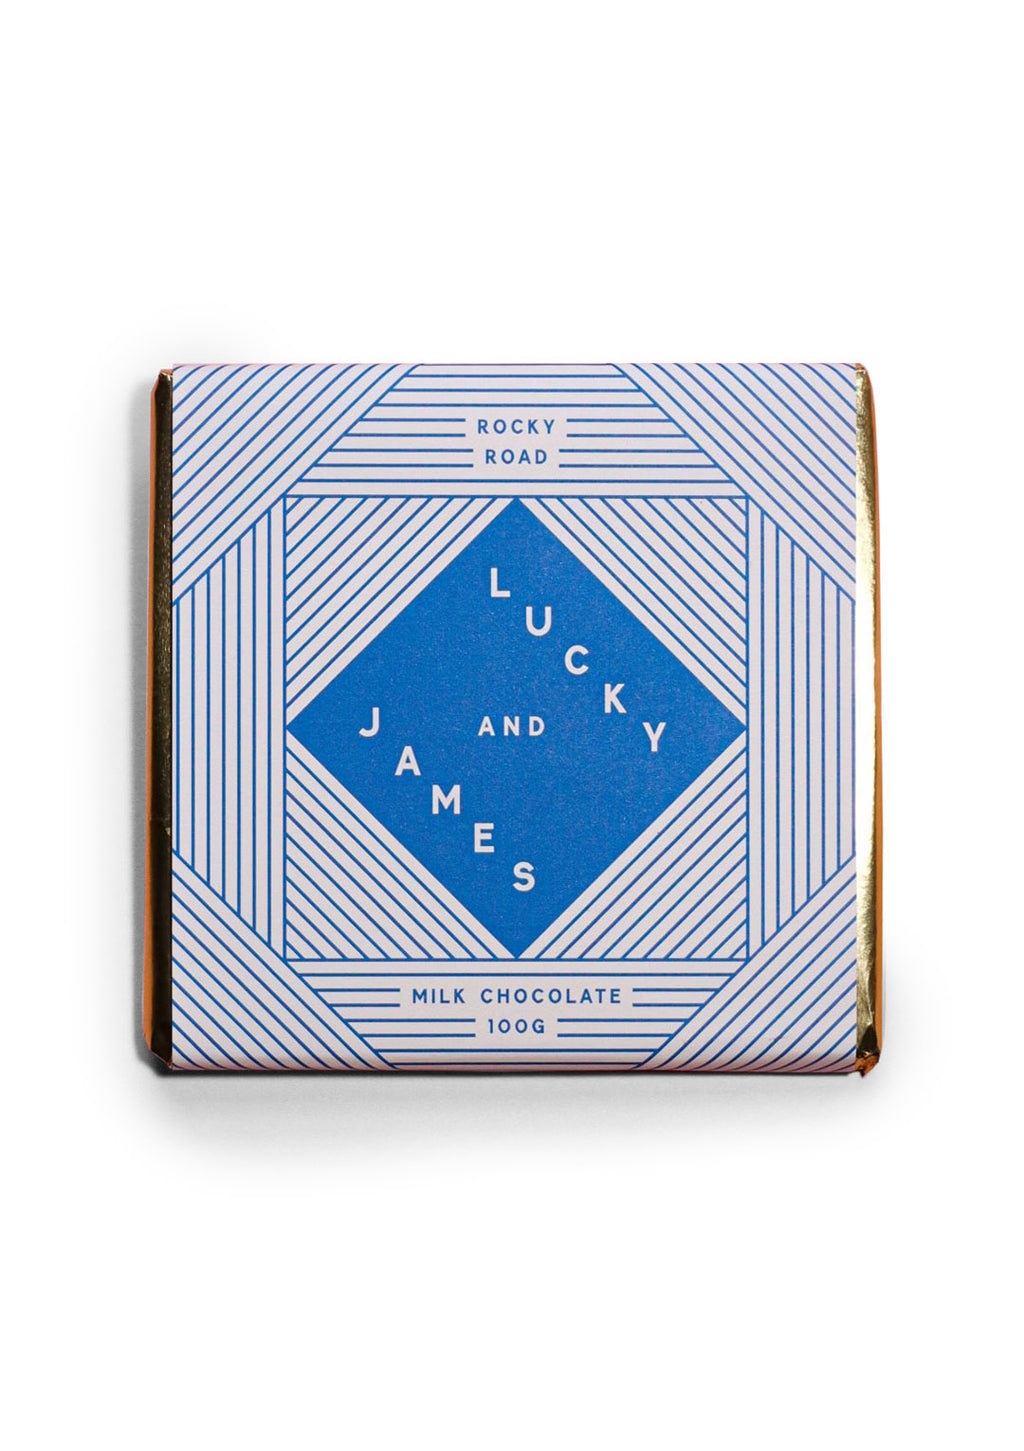 ROCKY ROAD MILK CHOCOLATE BY LUCKY AND JAMES